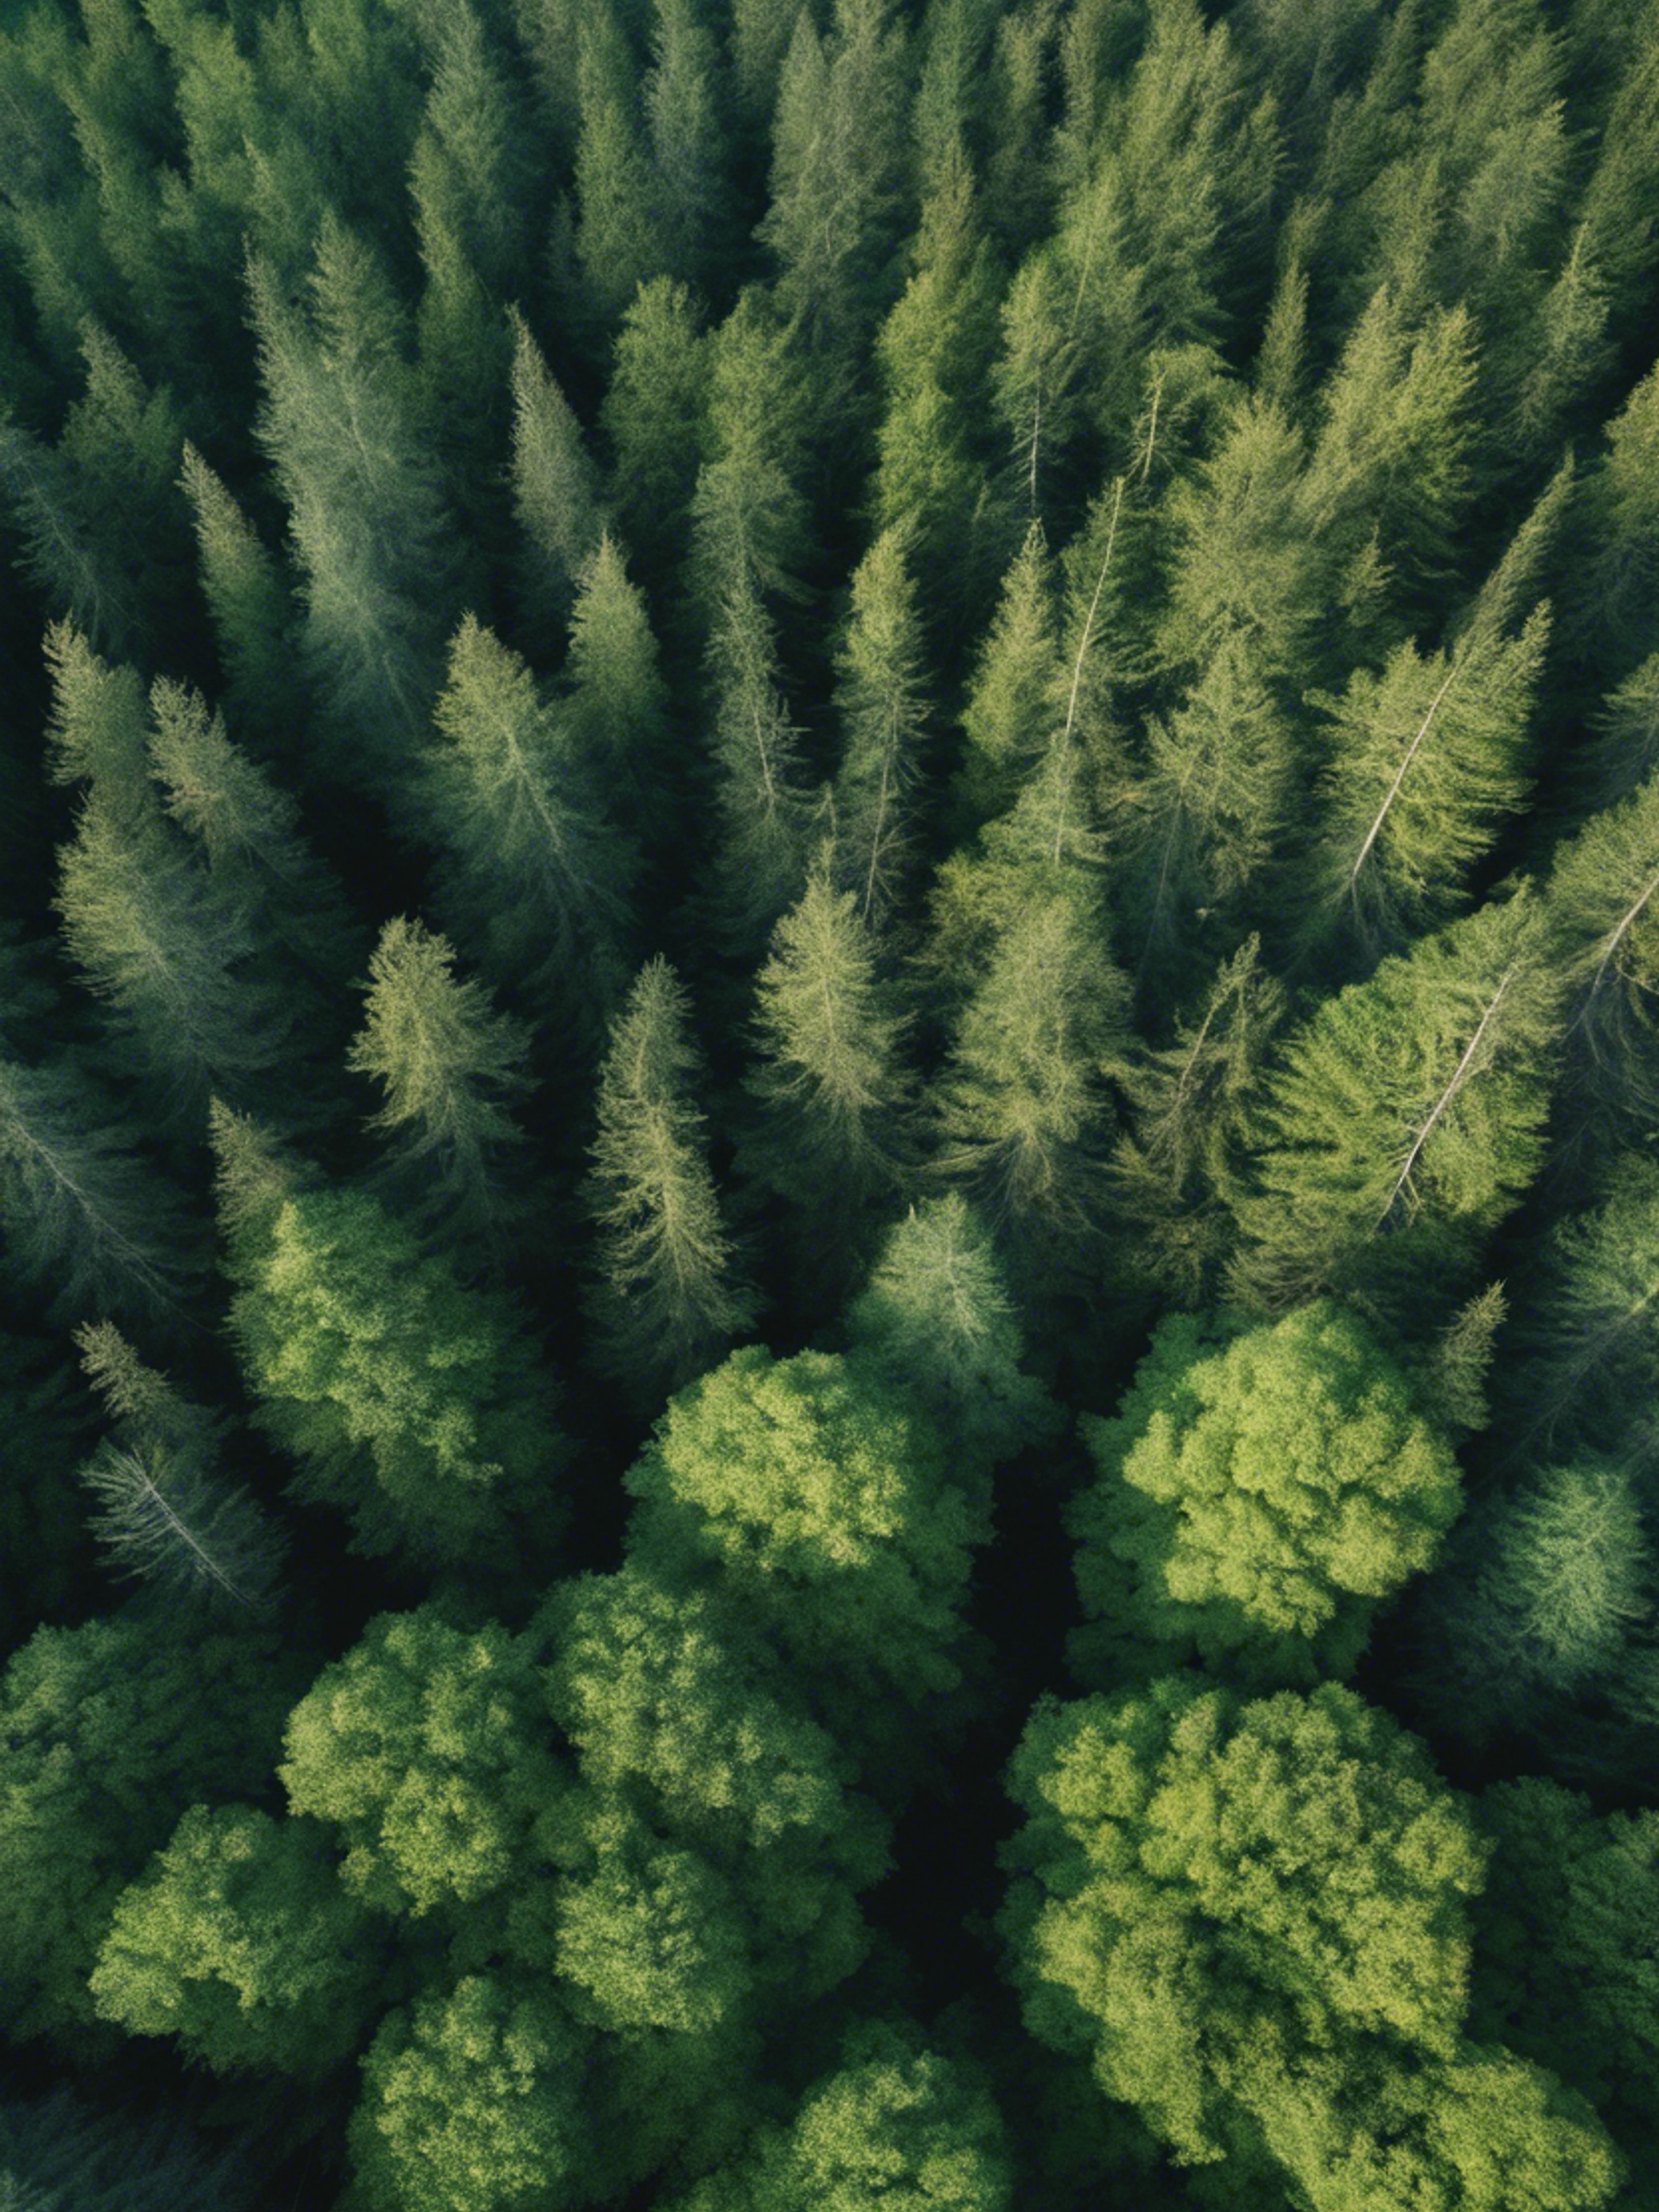 An aerial view of a summer forest, showing different shades of cool green. ផ្ទាំង​រូបភាព[0f690078d26f4d7895b4]